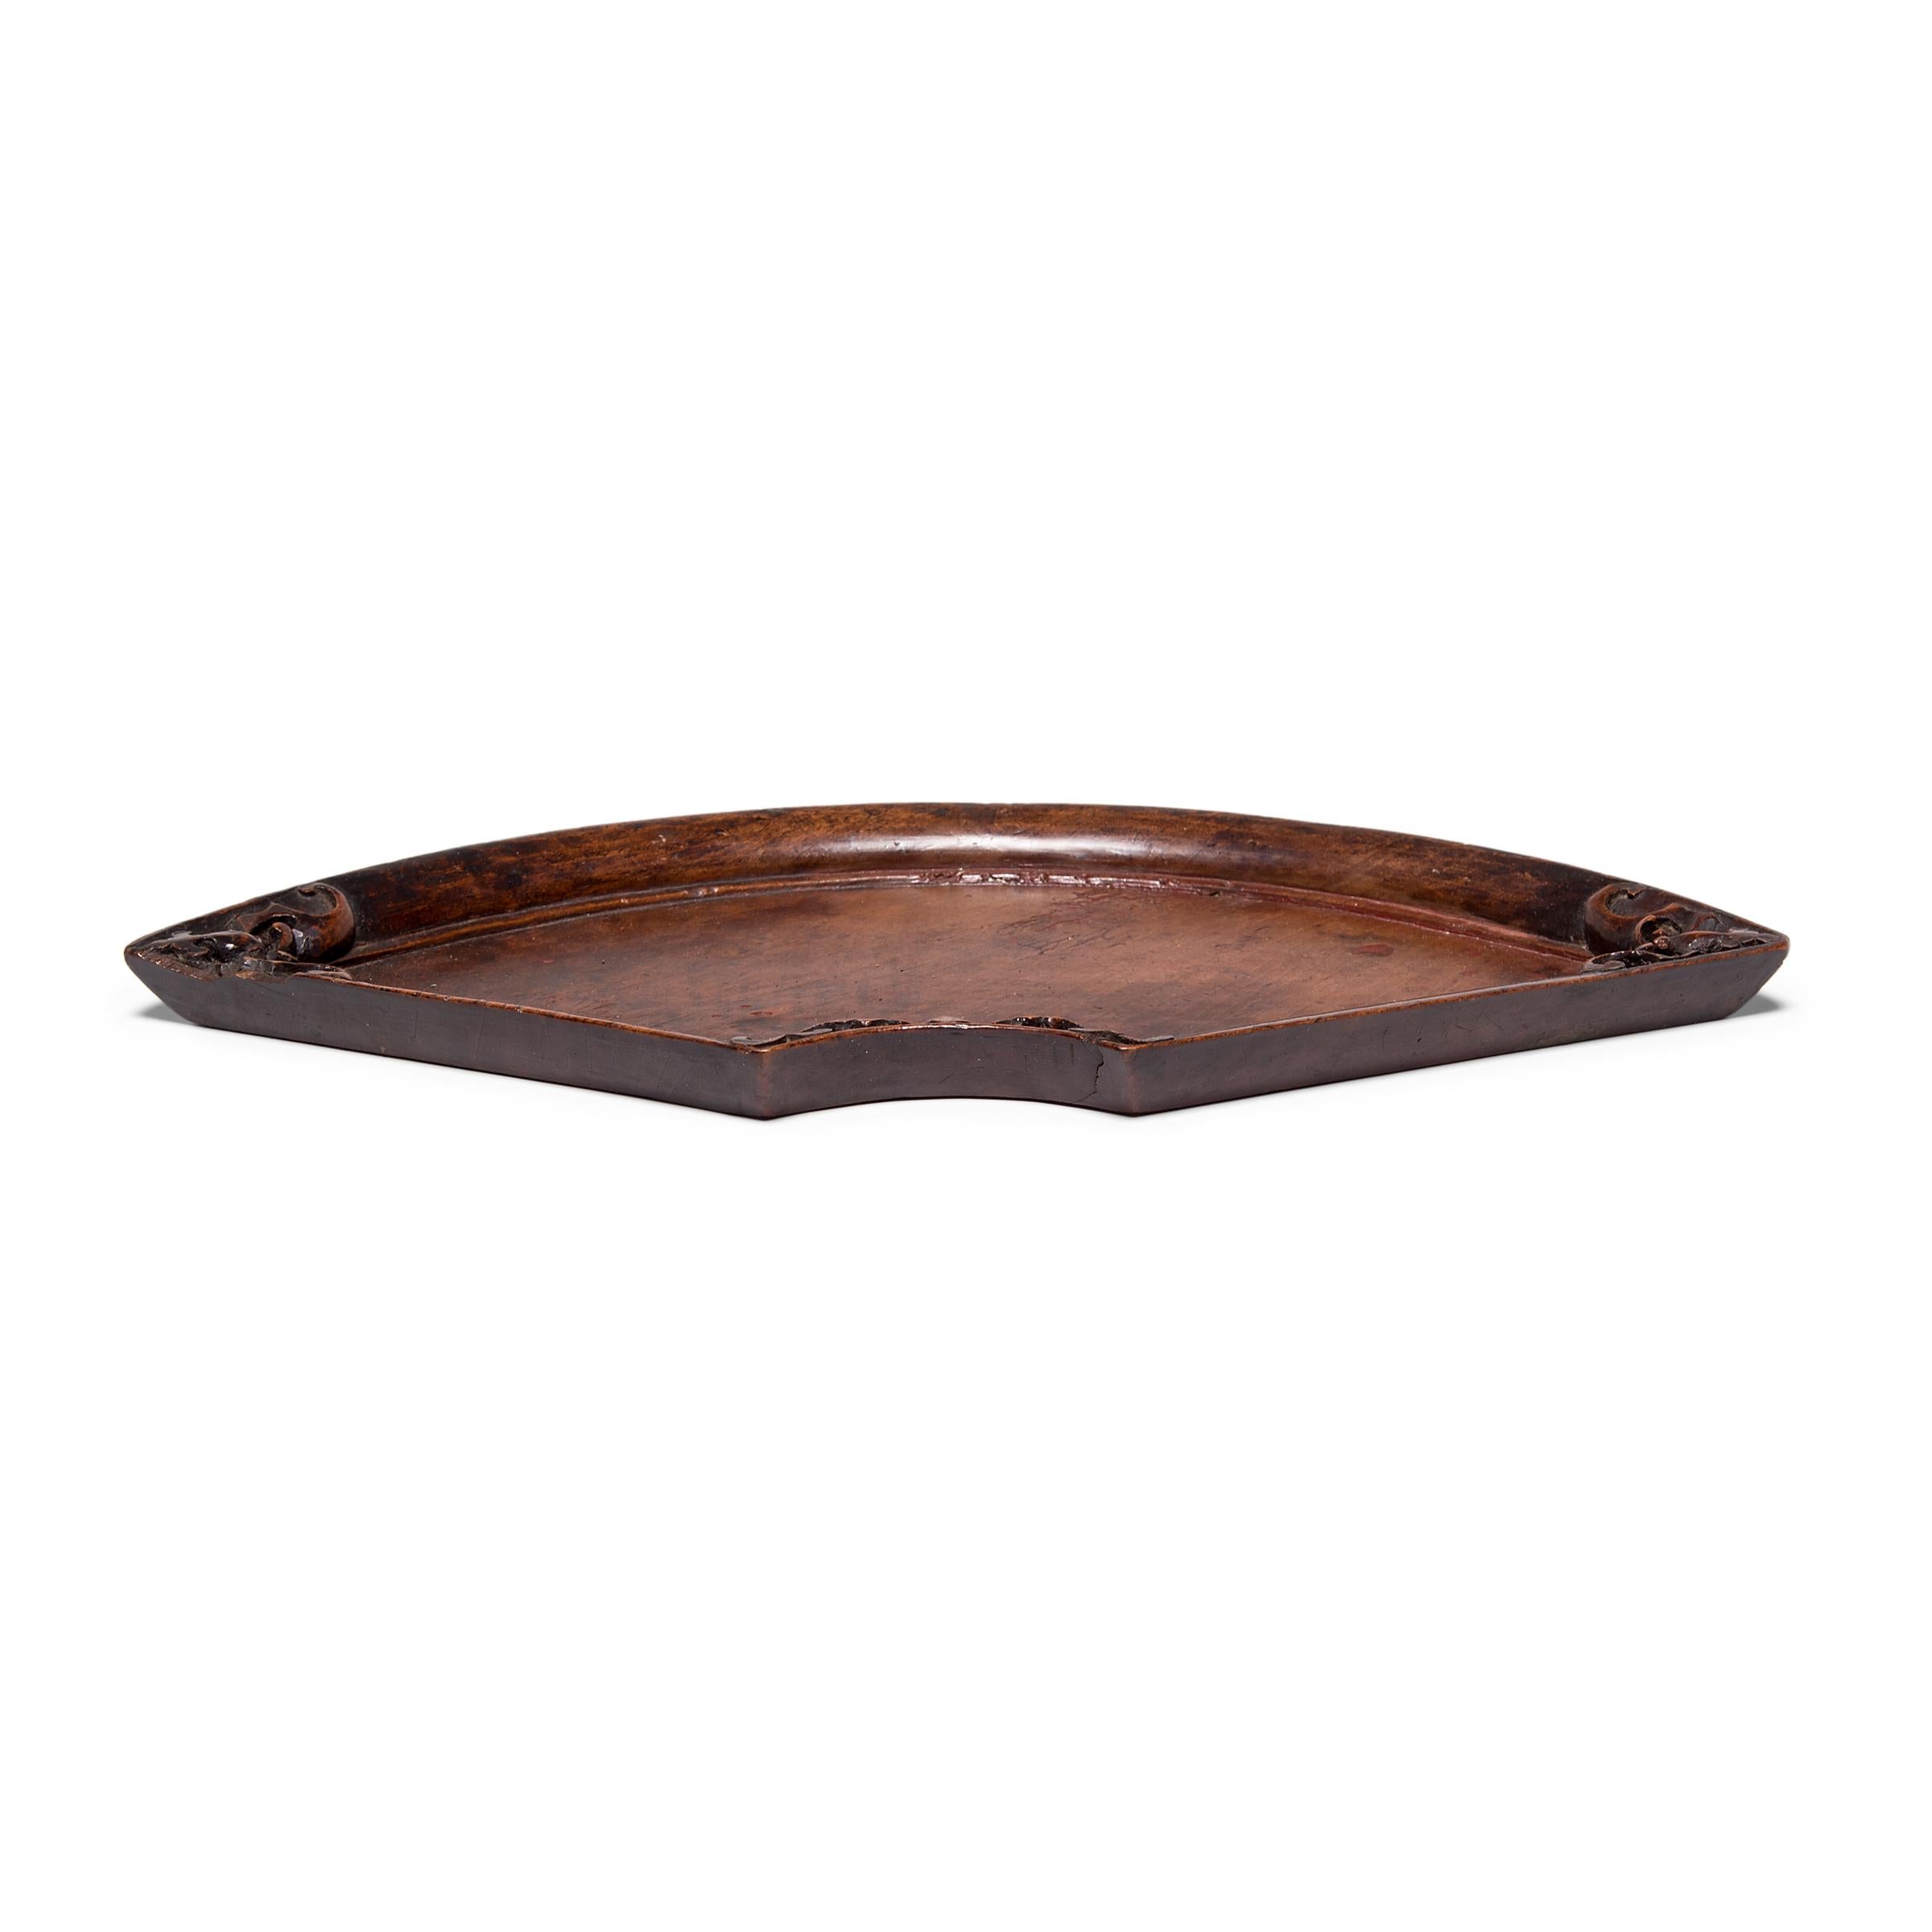 Hand-carved from birchwood, this exquisite tray is an excellent example of 19th century art from China's Shanxi province. The tray is shaped in the form of a paper fan, an accessory that emerged in China over 3,000 years ago and gained symbolic